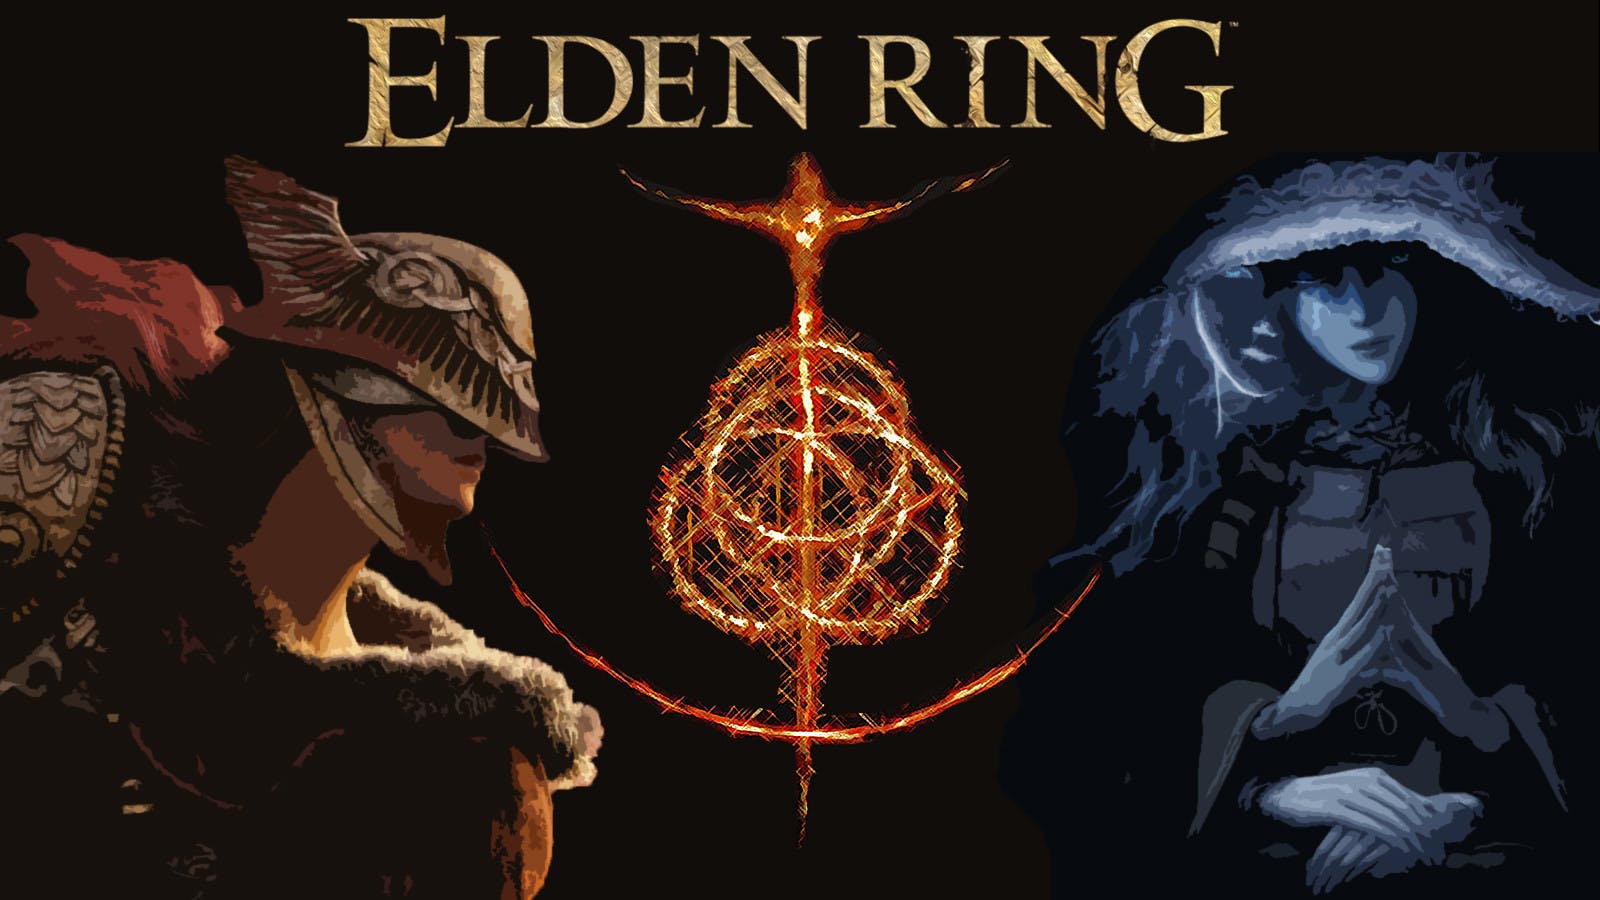 I made Elden Ring's PS5 Homepage [Fan made] : r/Eldenring